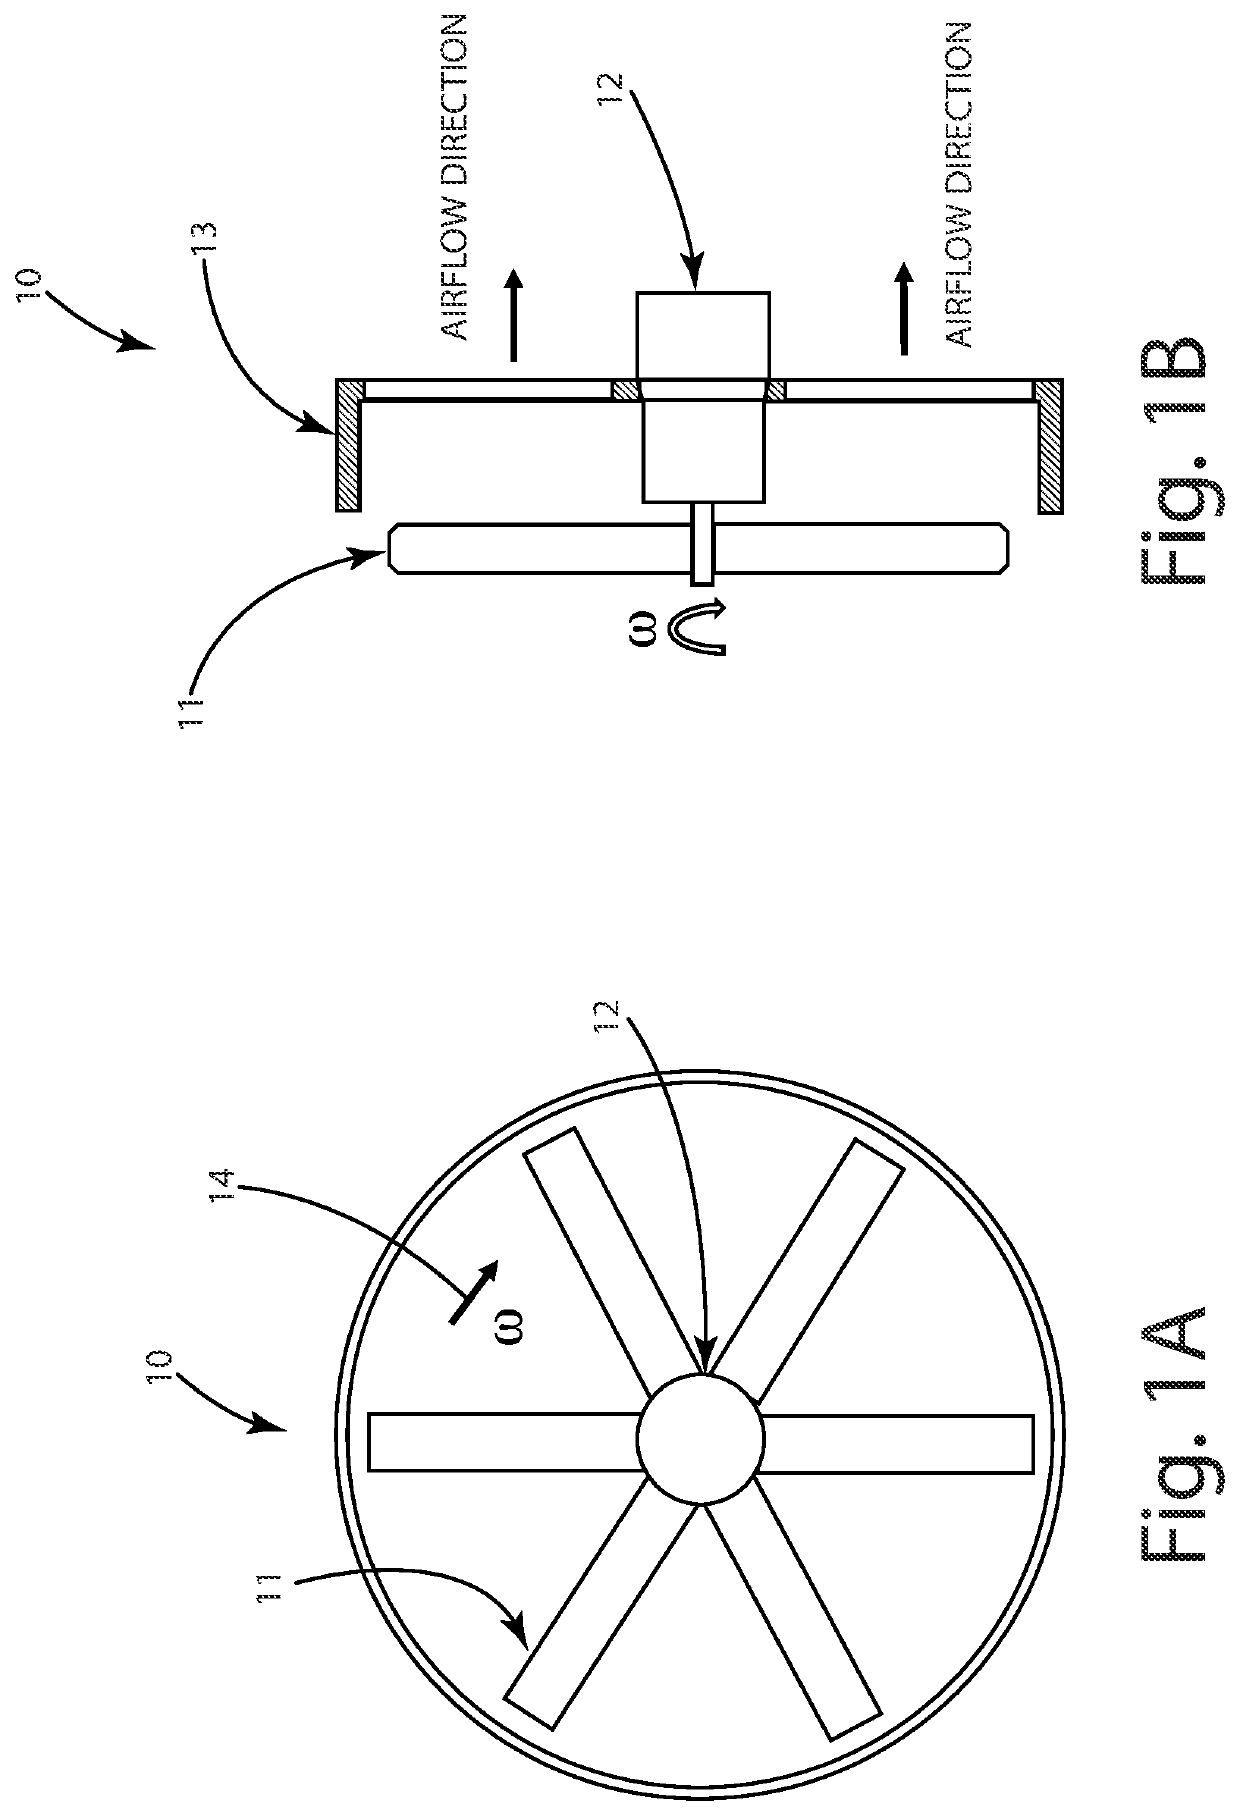 Systems and methods for interior permanent magnet synchronous motor control